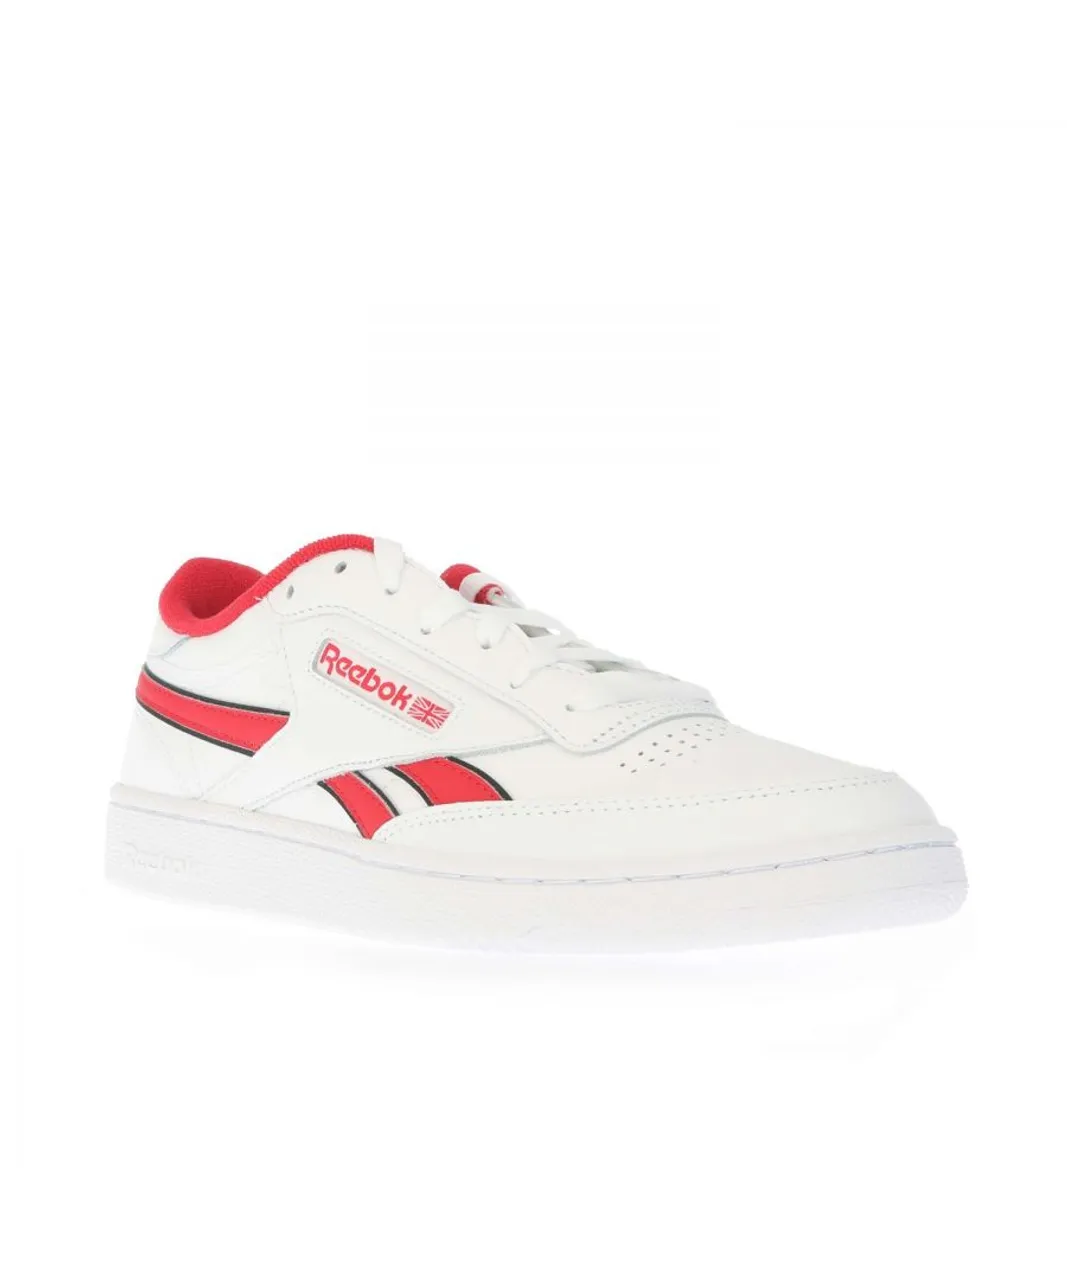 Reebok Mens Classics Club C Revenge Trainers in White red Leather (archived)